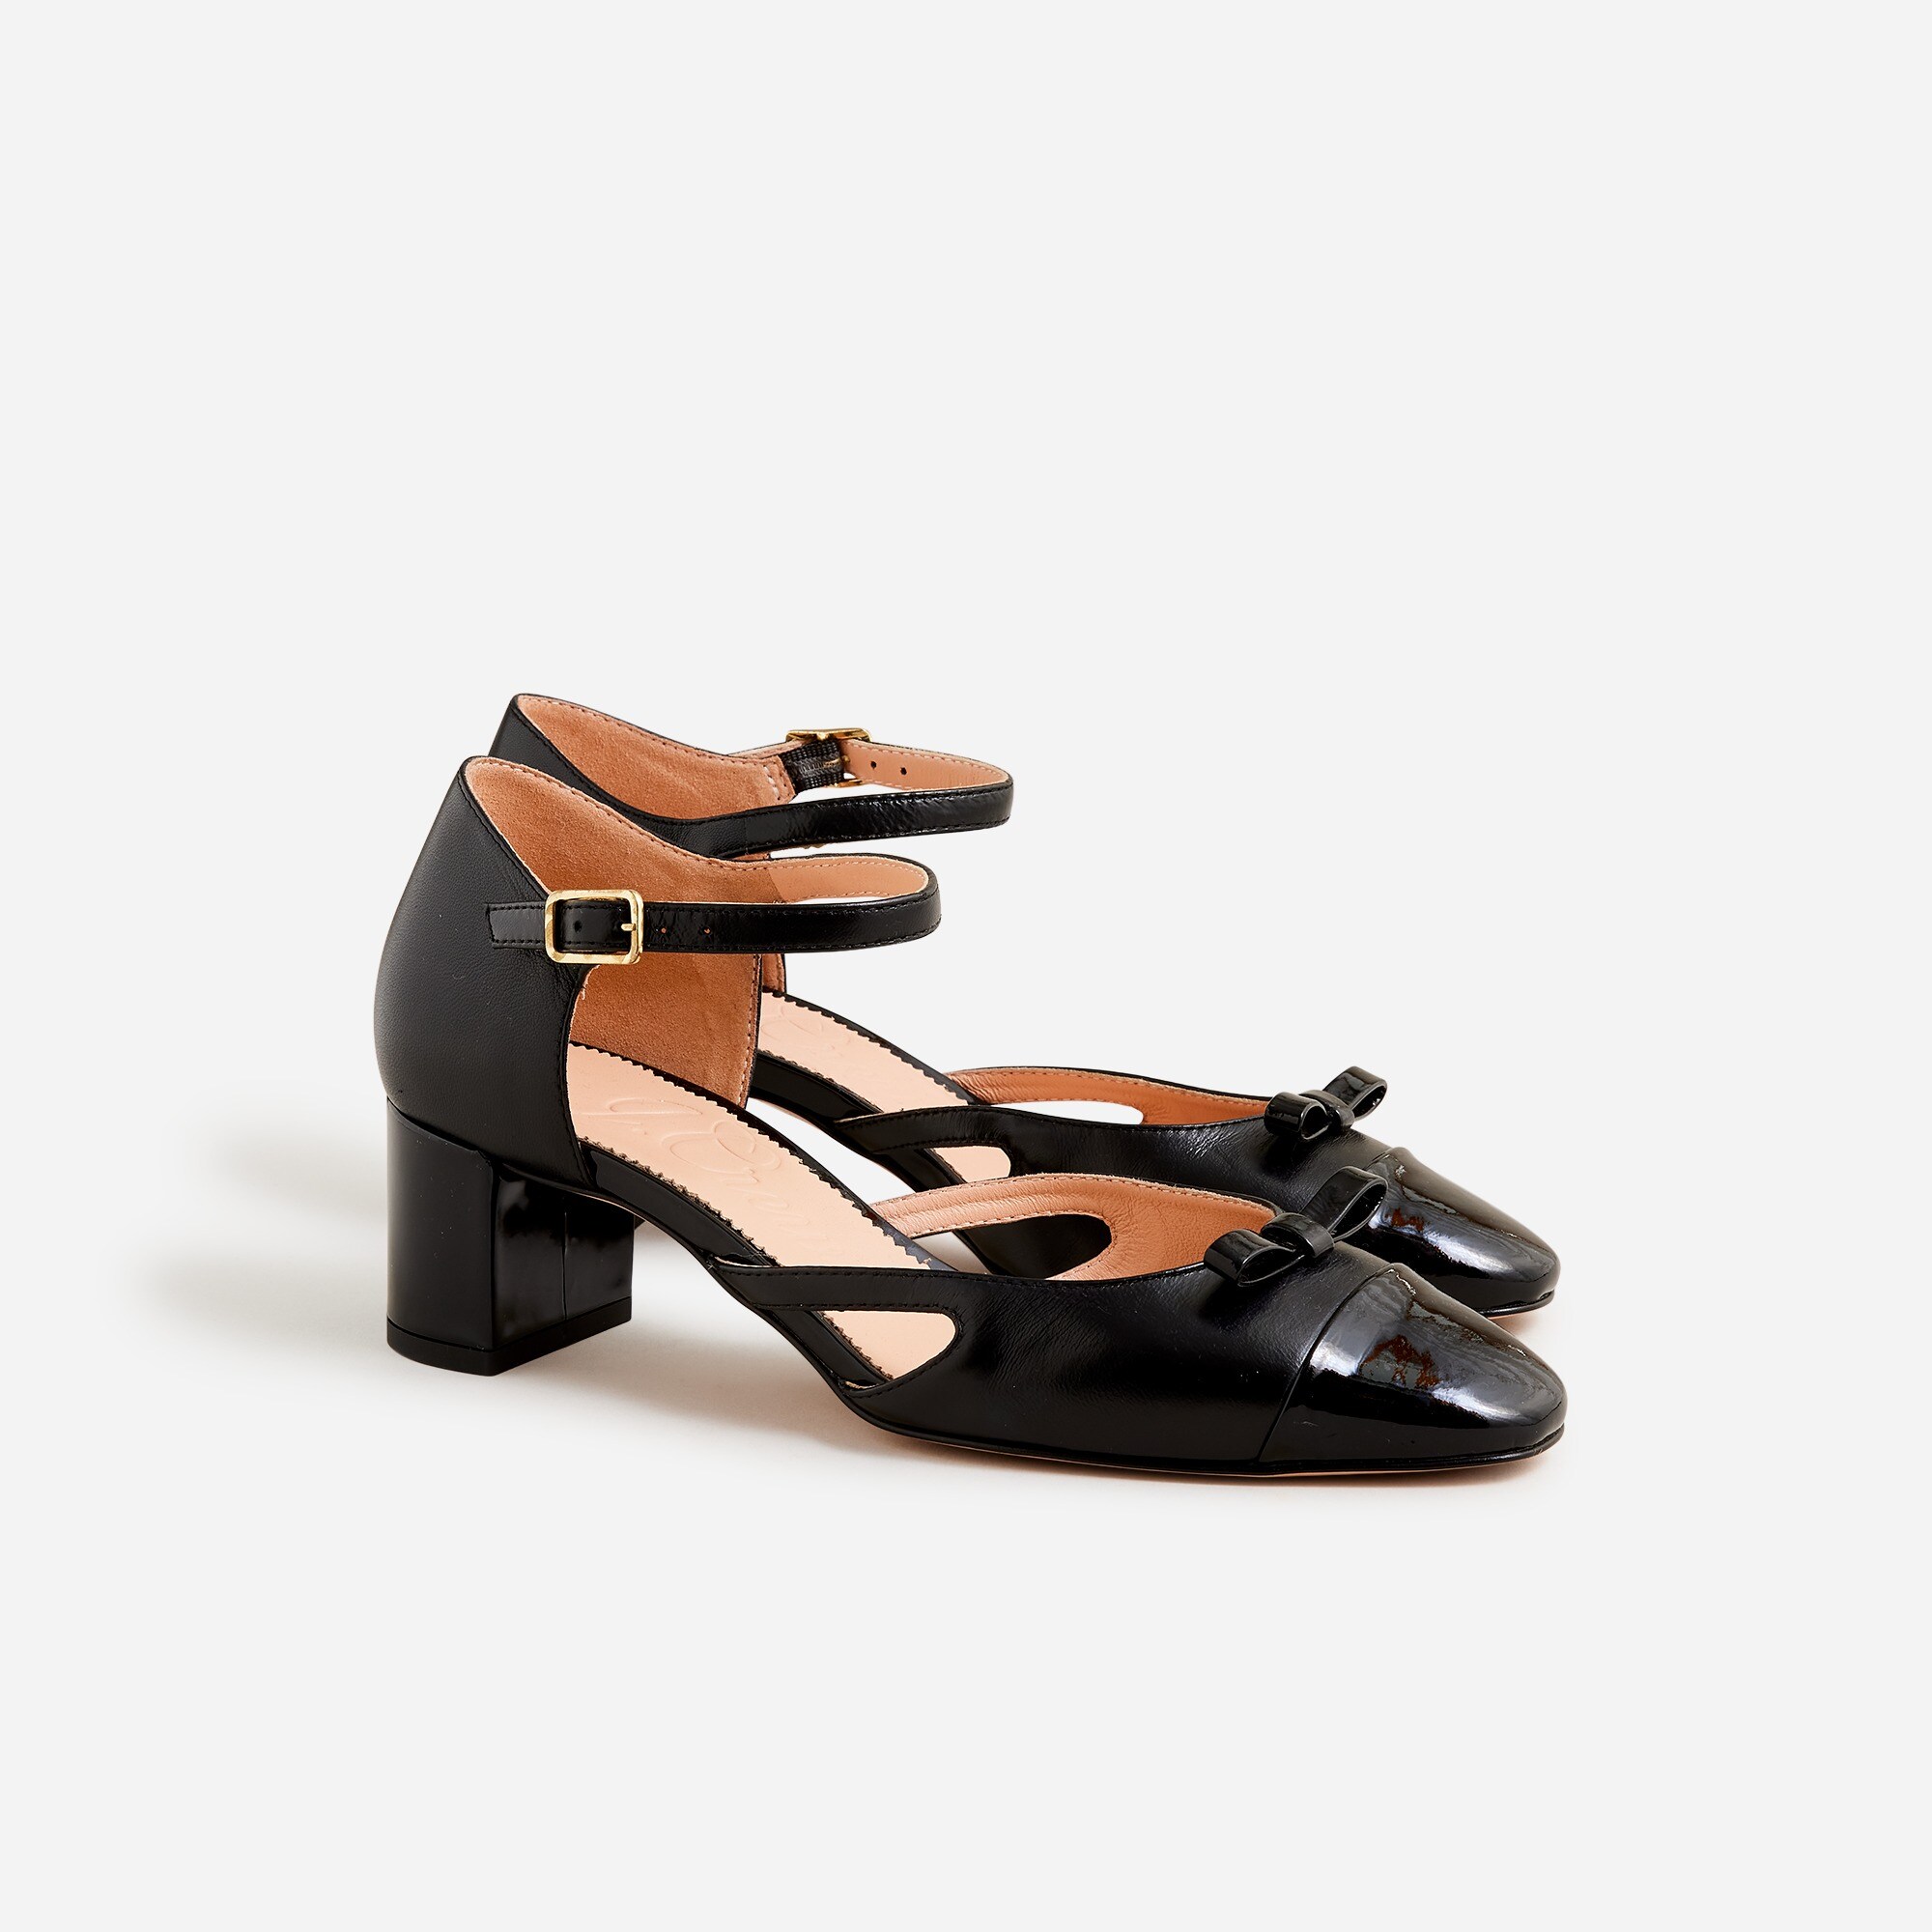  Millie ankle-strap cutout heels in leather